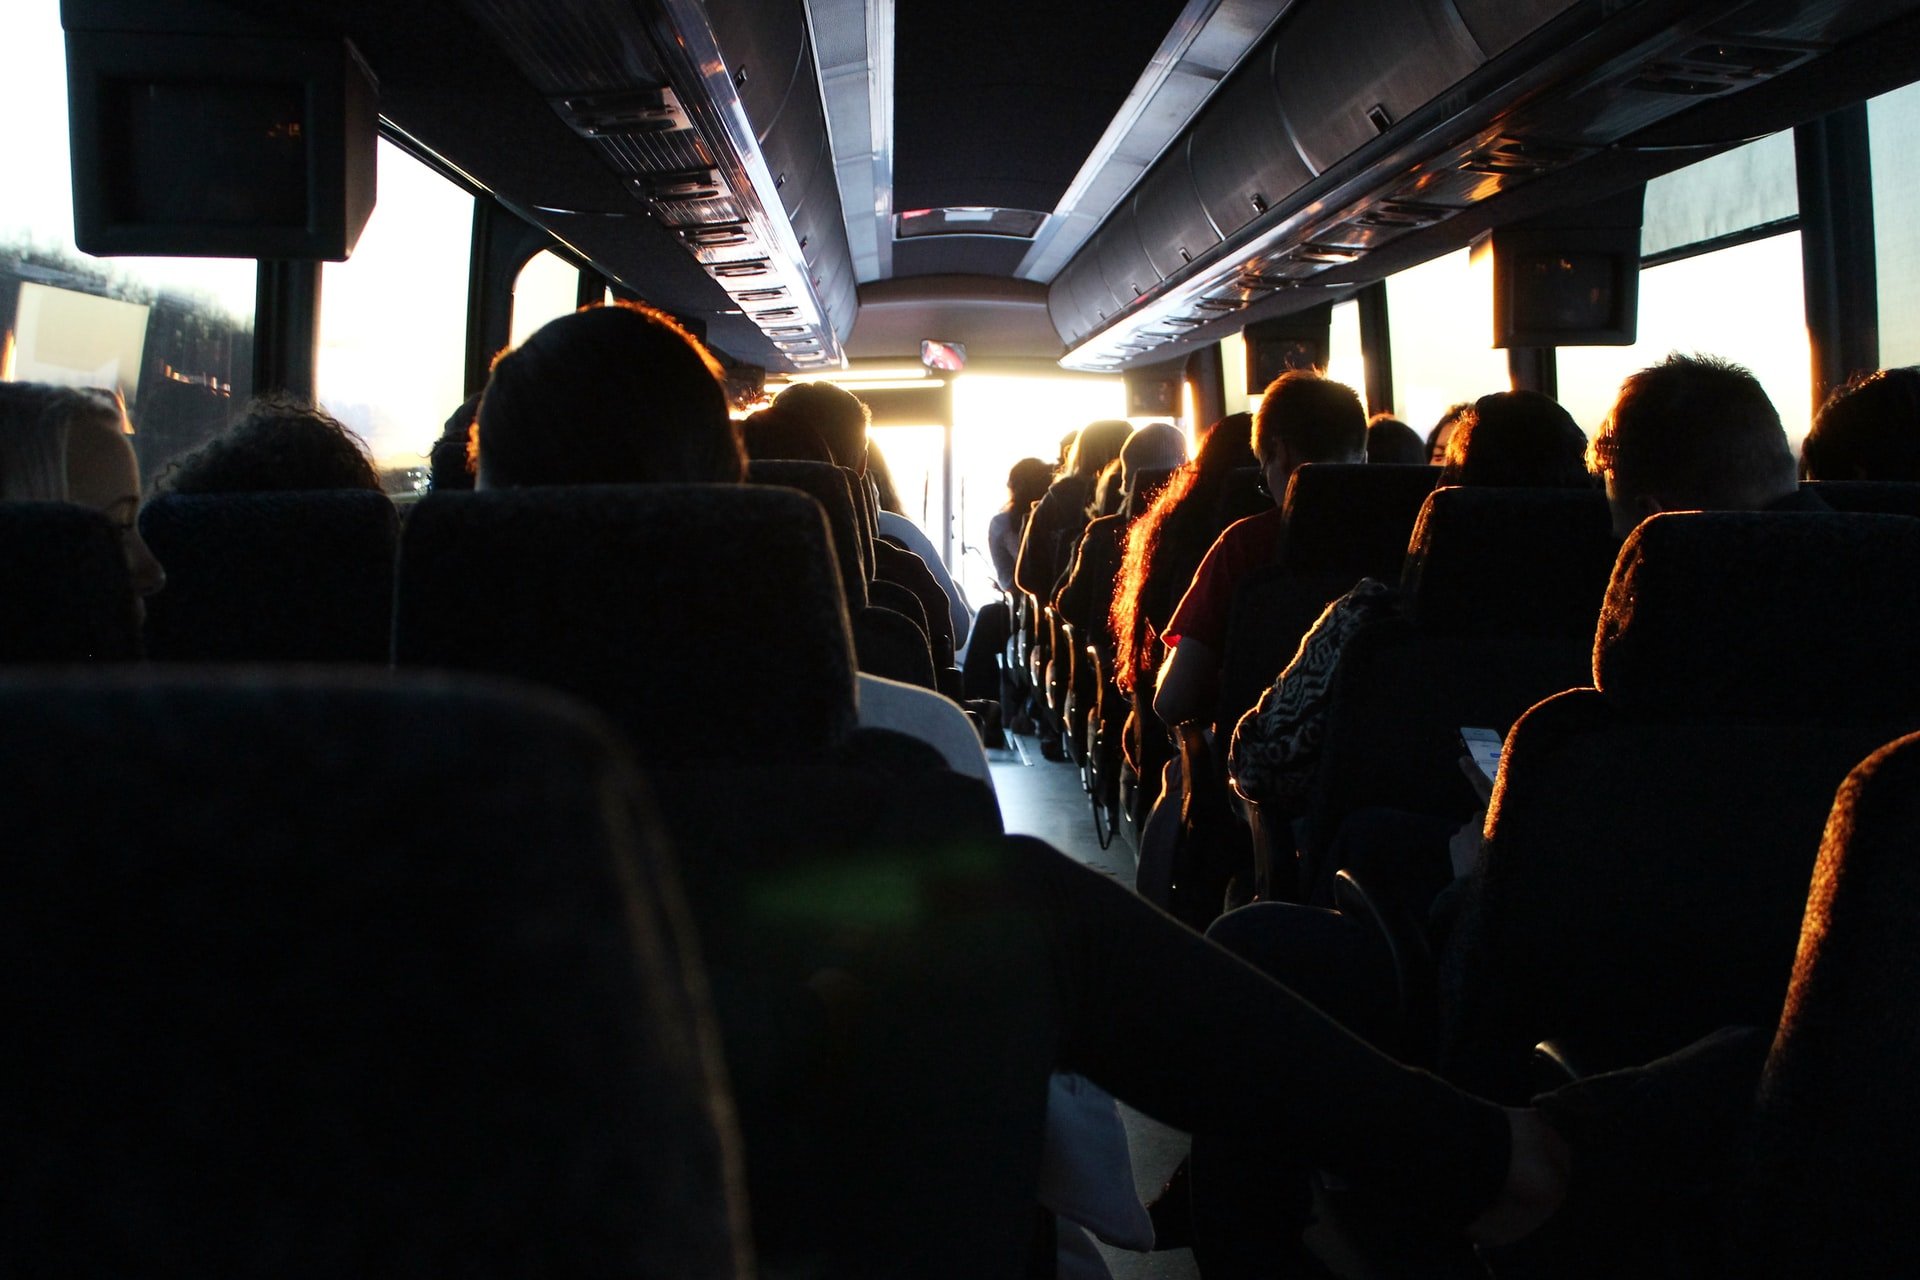 The bus was packed with passengers | Source: Unsplash